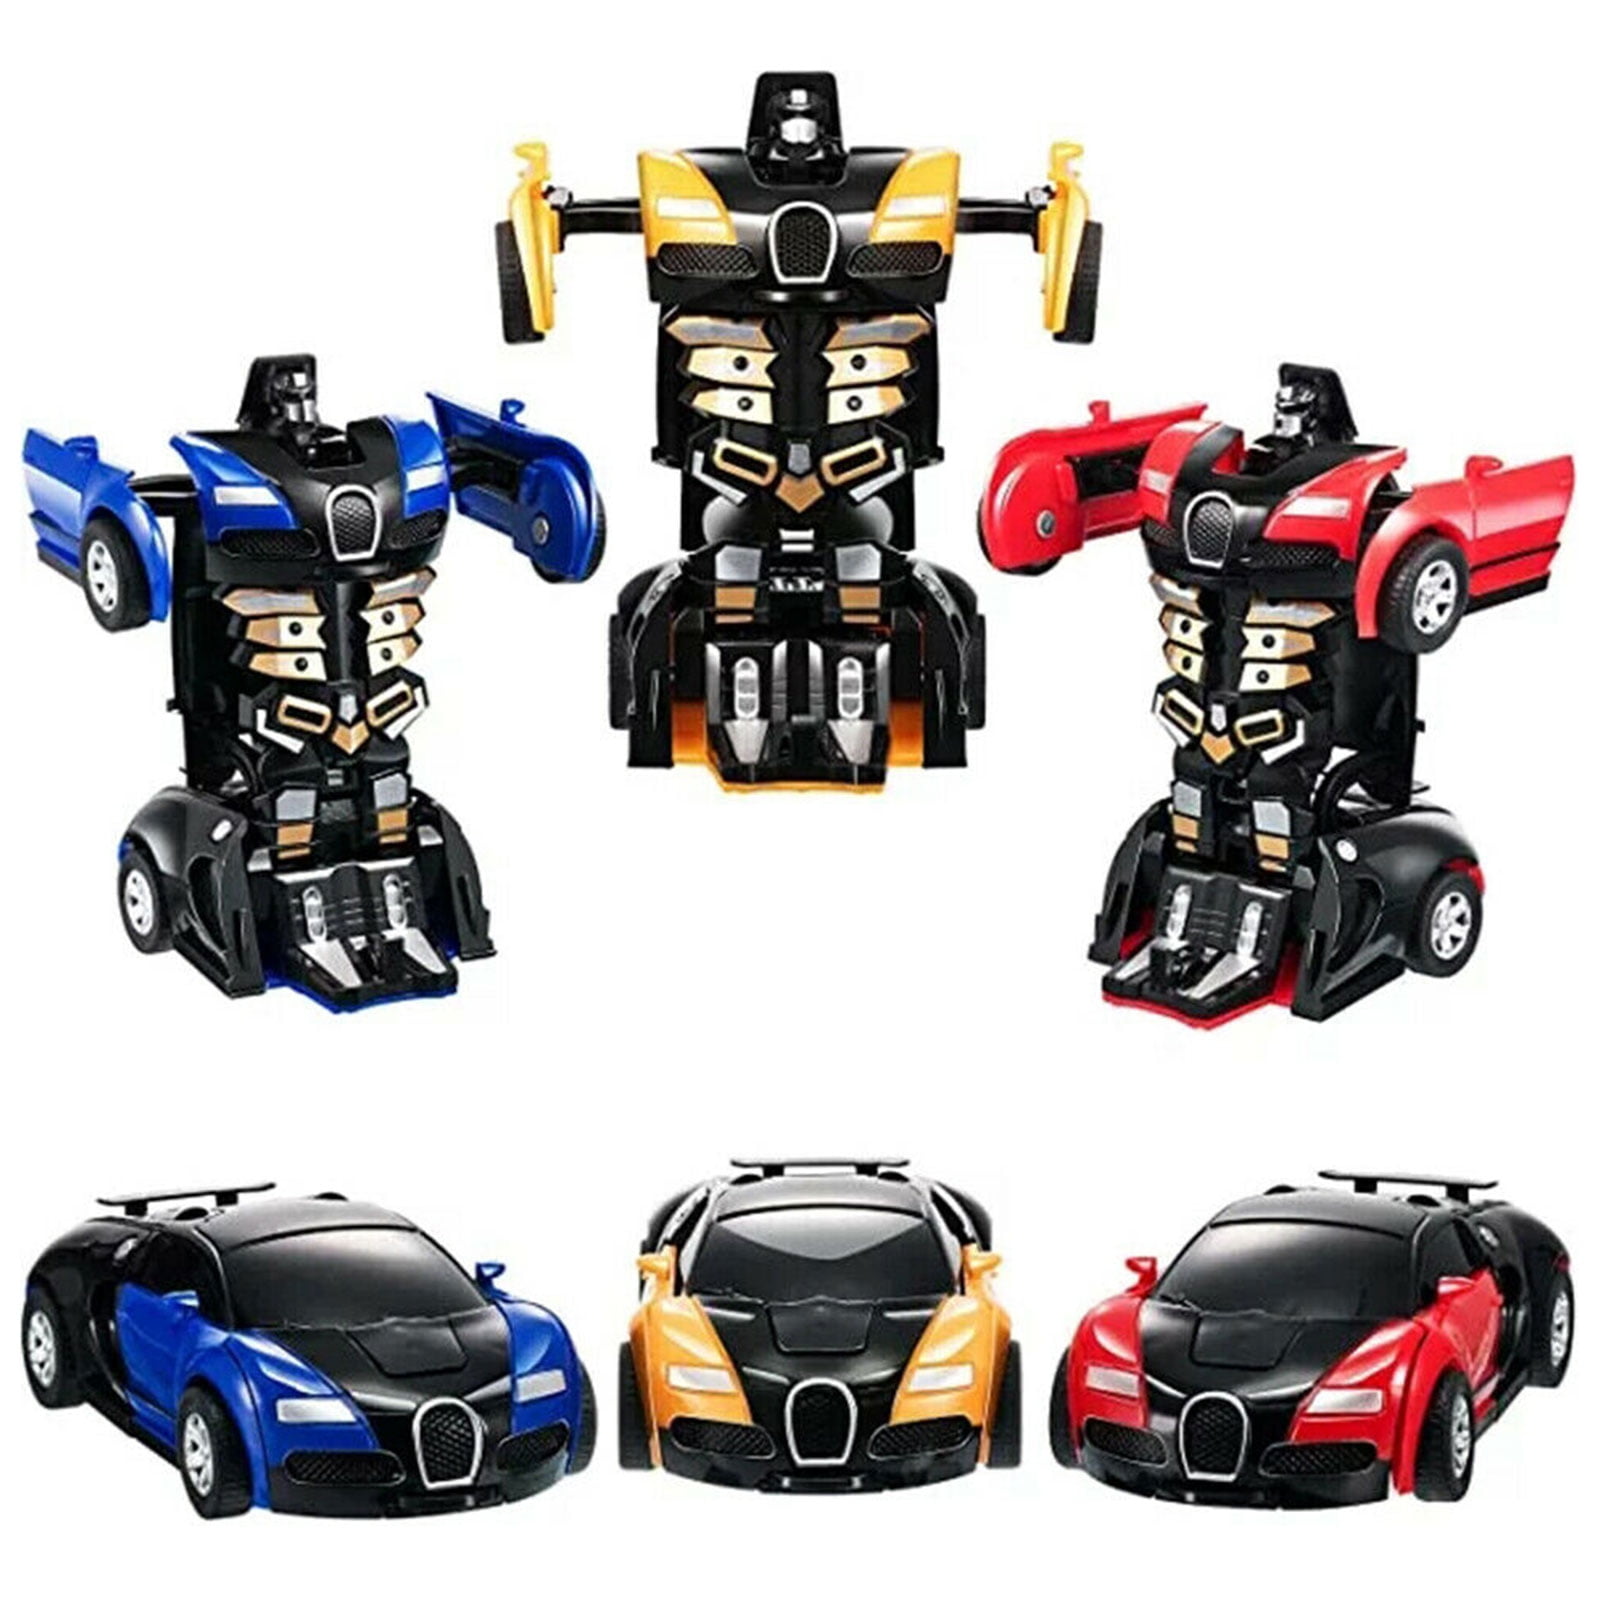 Robot Car Transforming Kids Toy Toddler Auto Robots Cool gift for kids